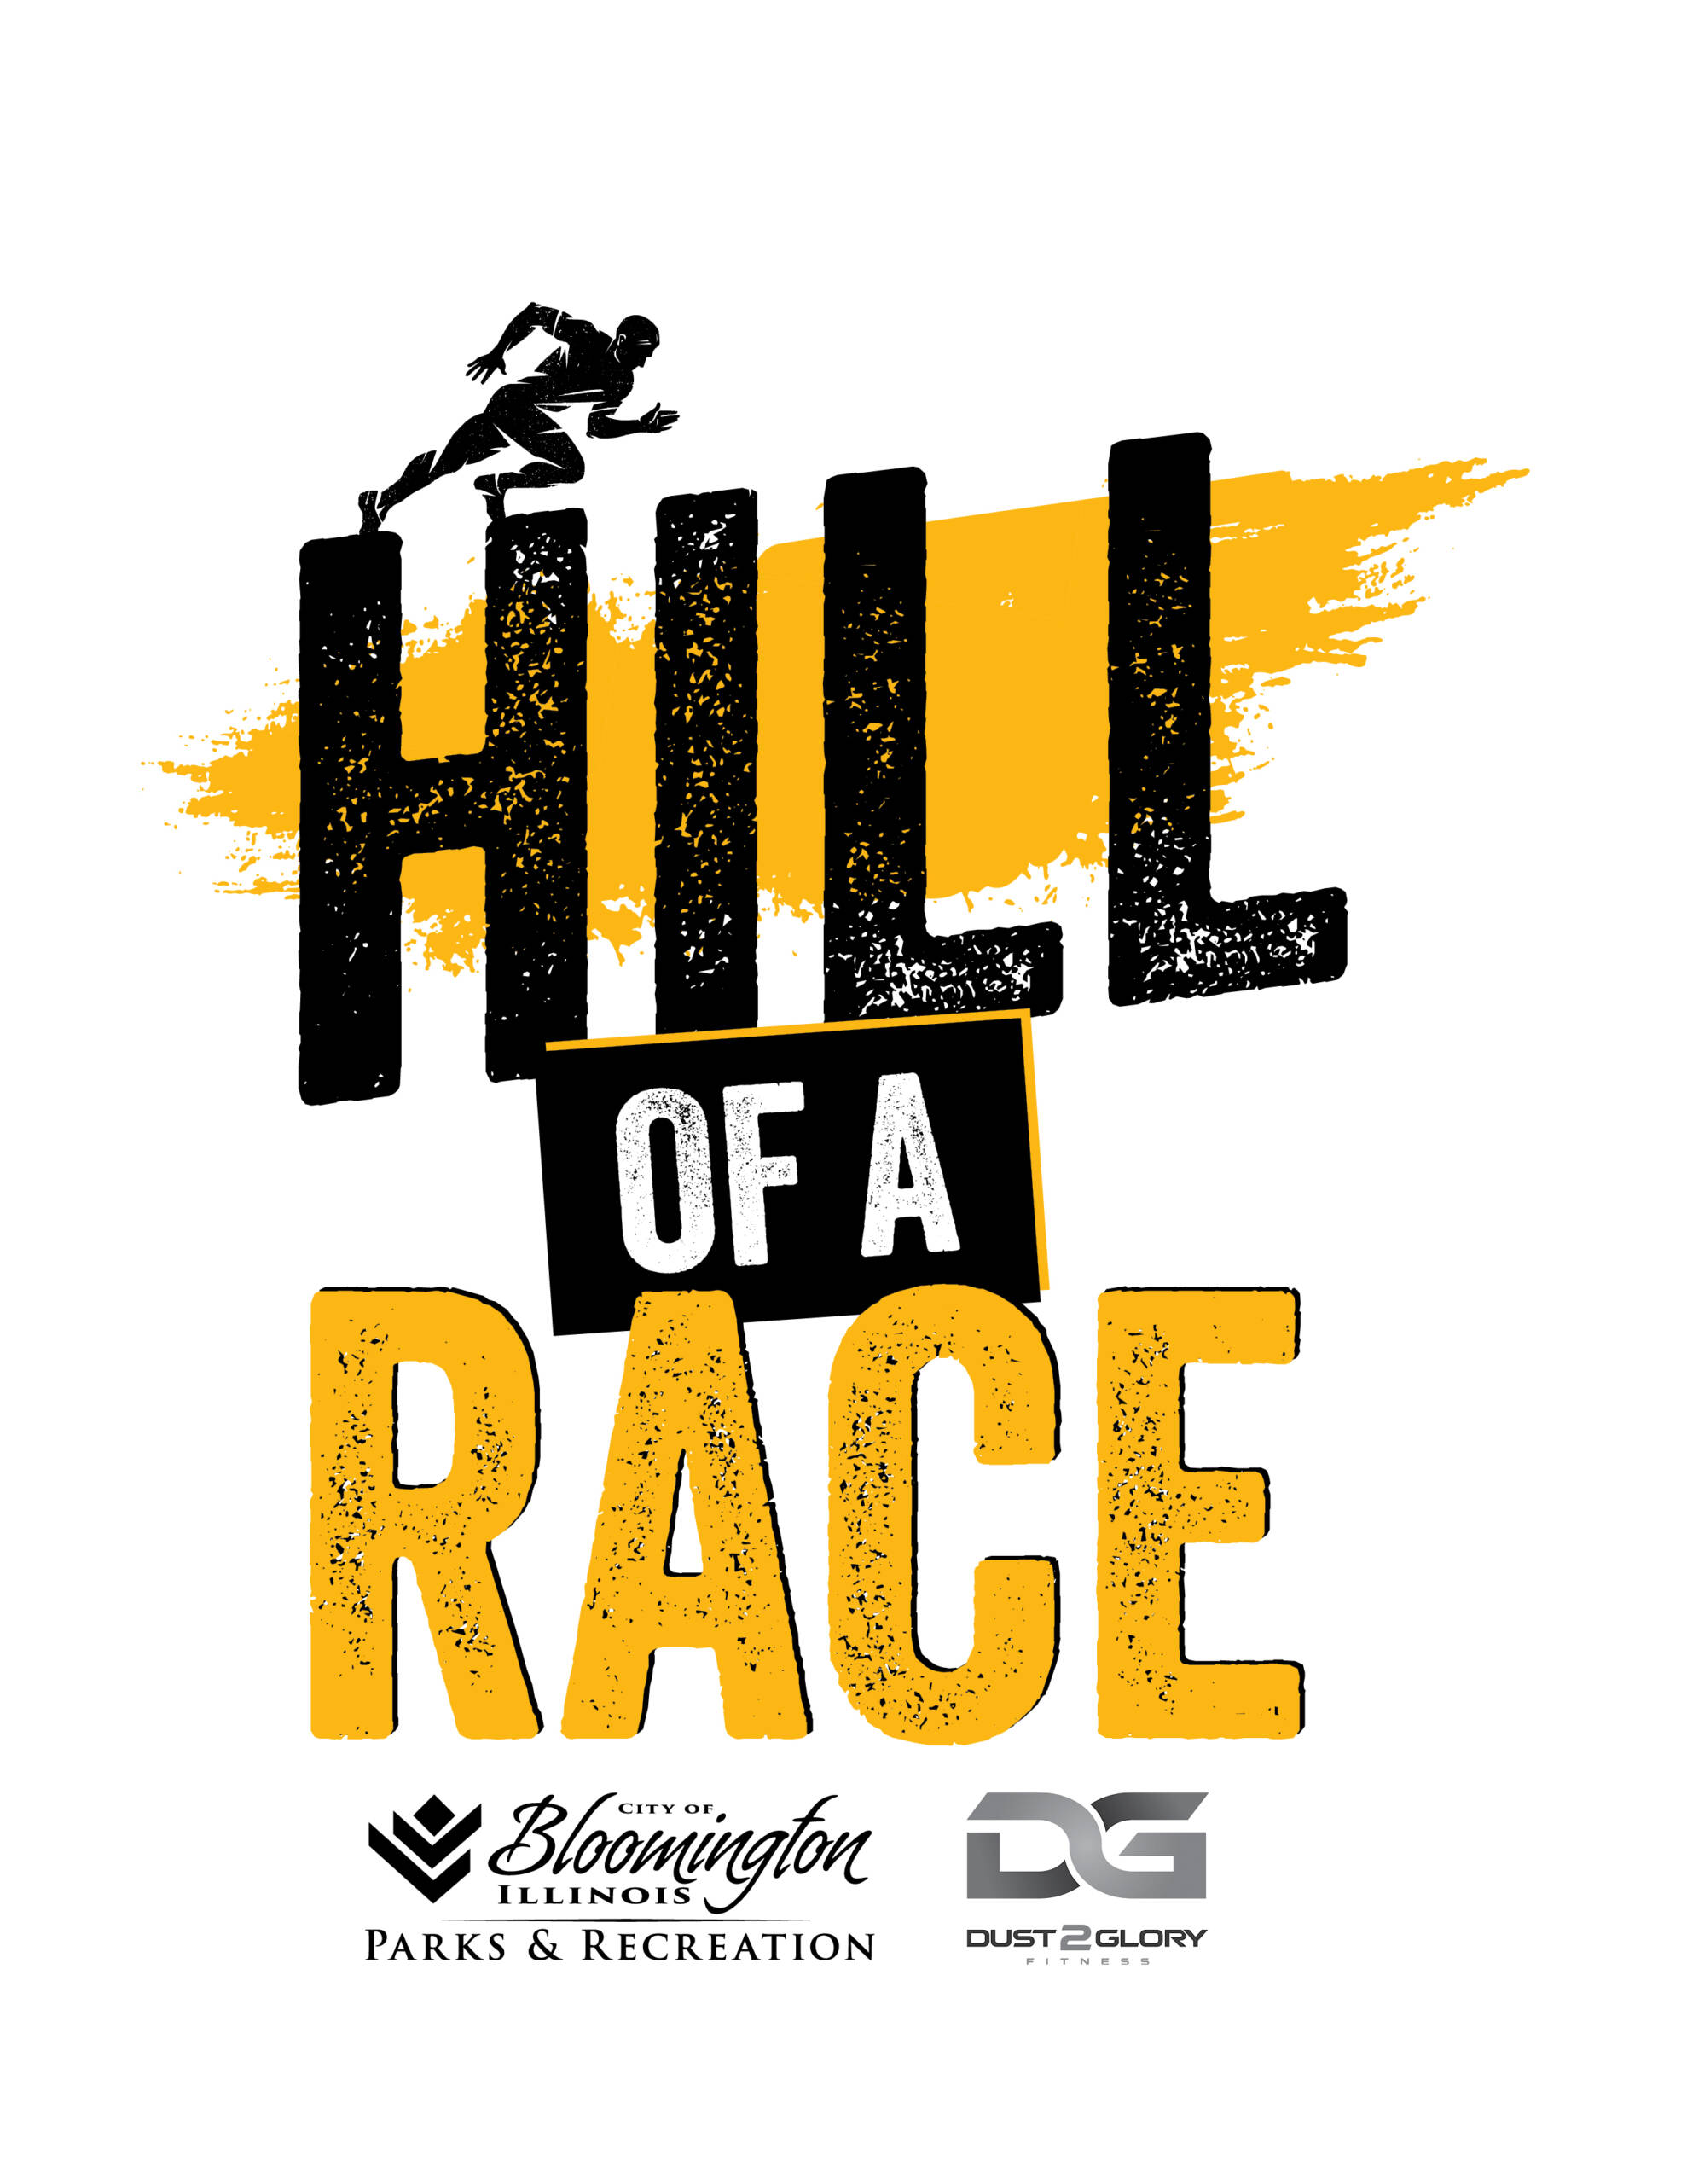 Hill of a Race